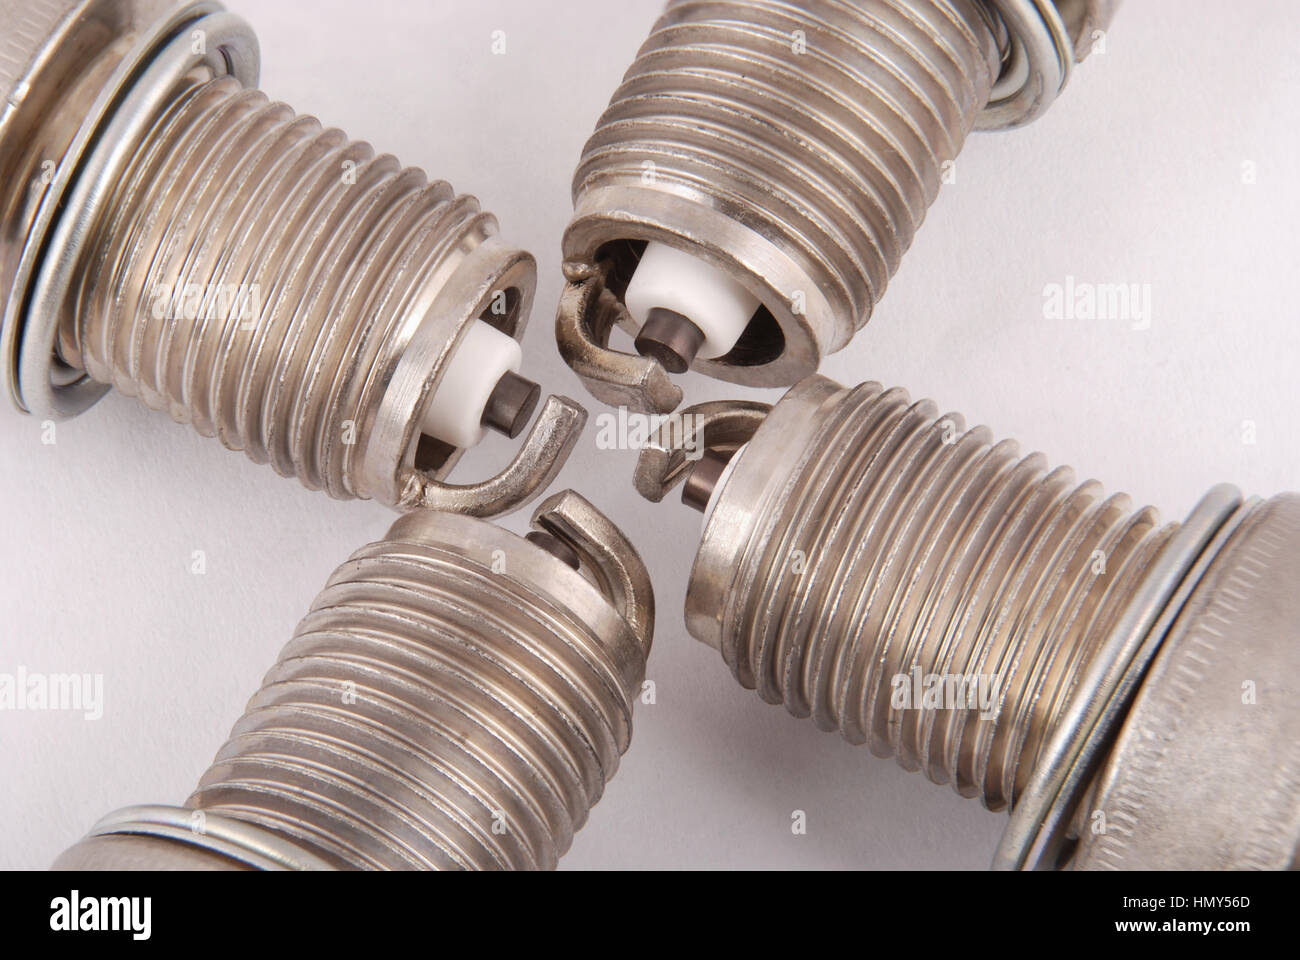 Four new spark plugs on a gray background Stock Photo